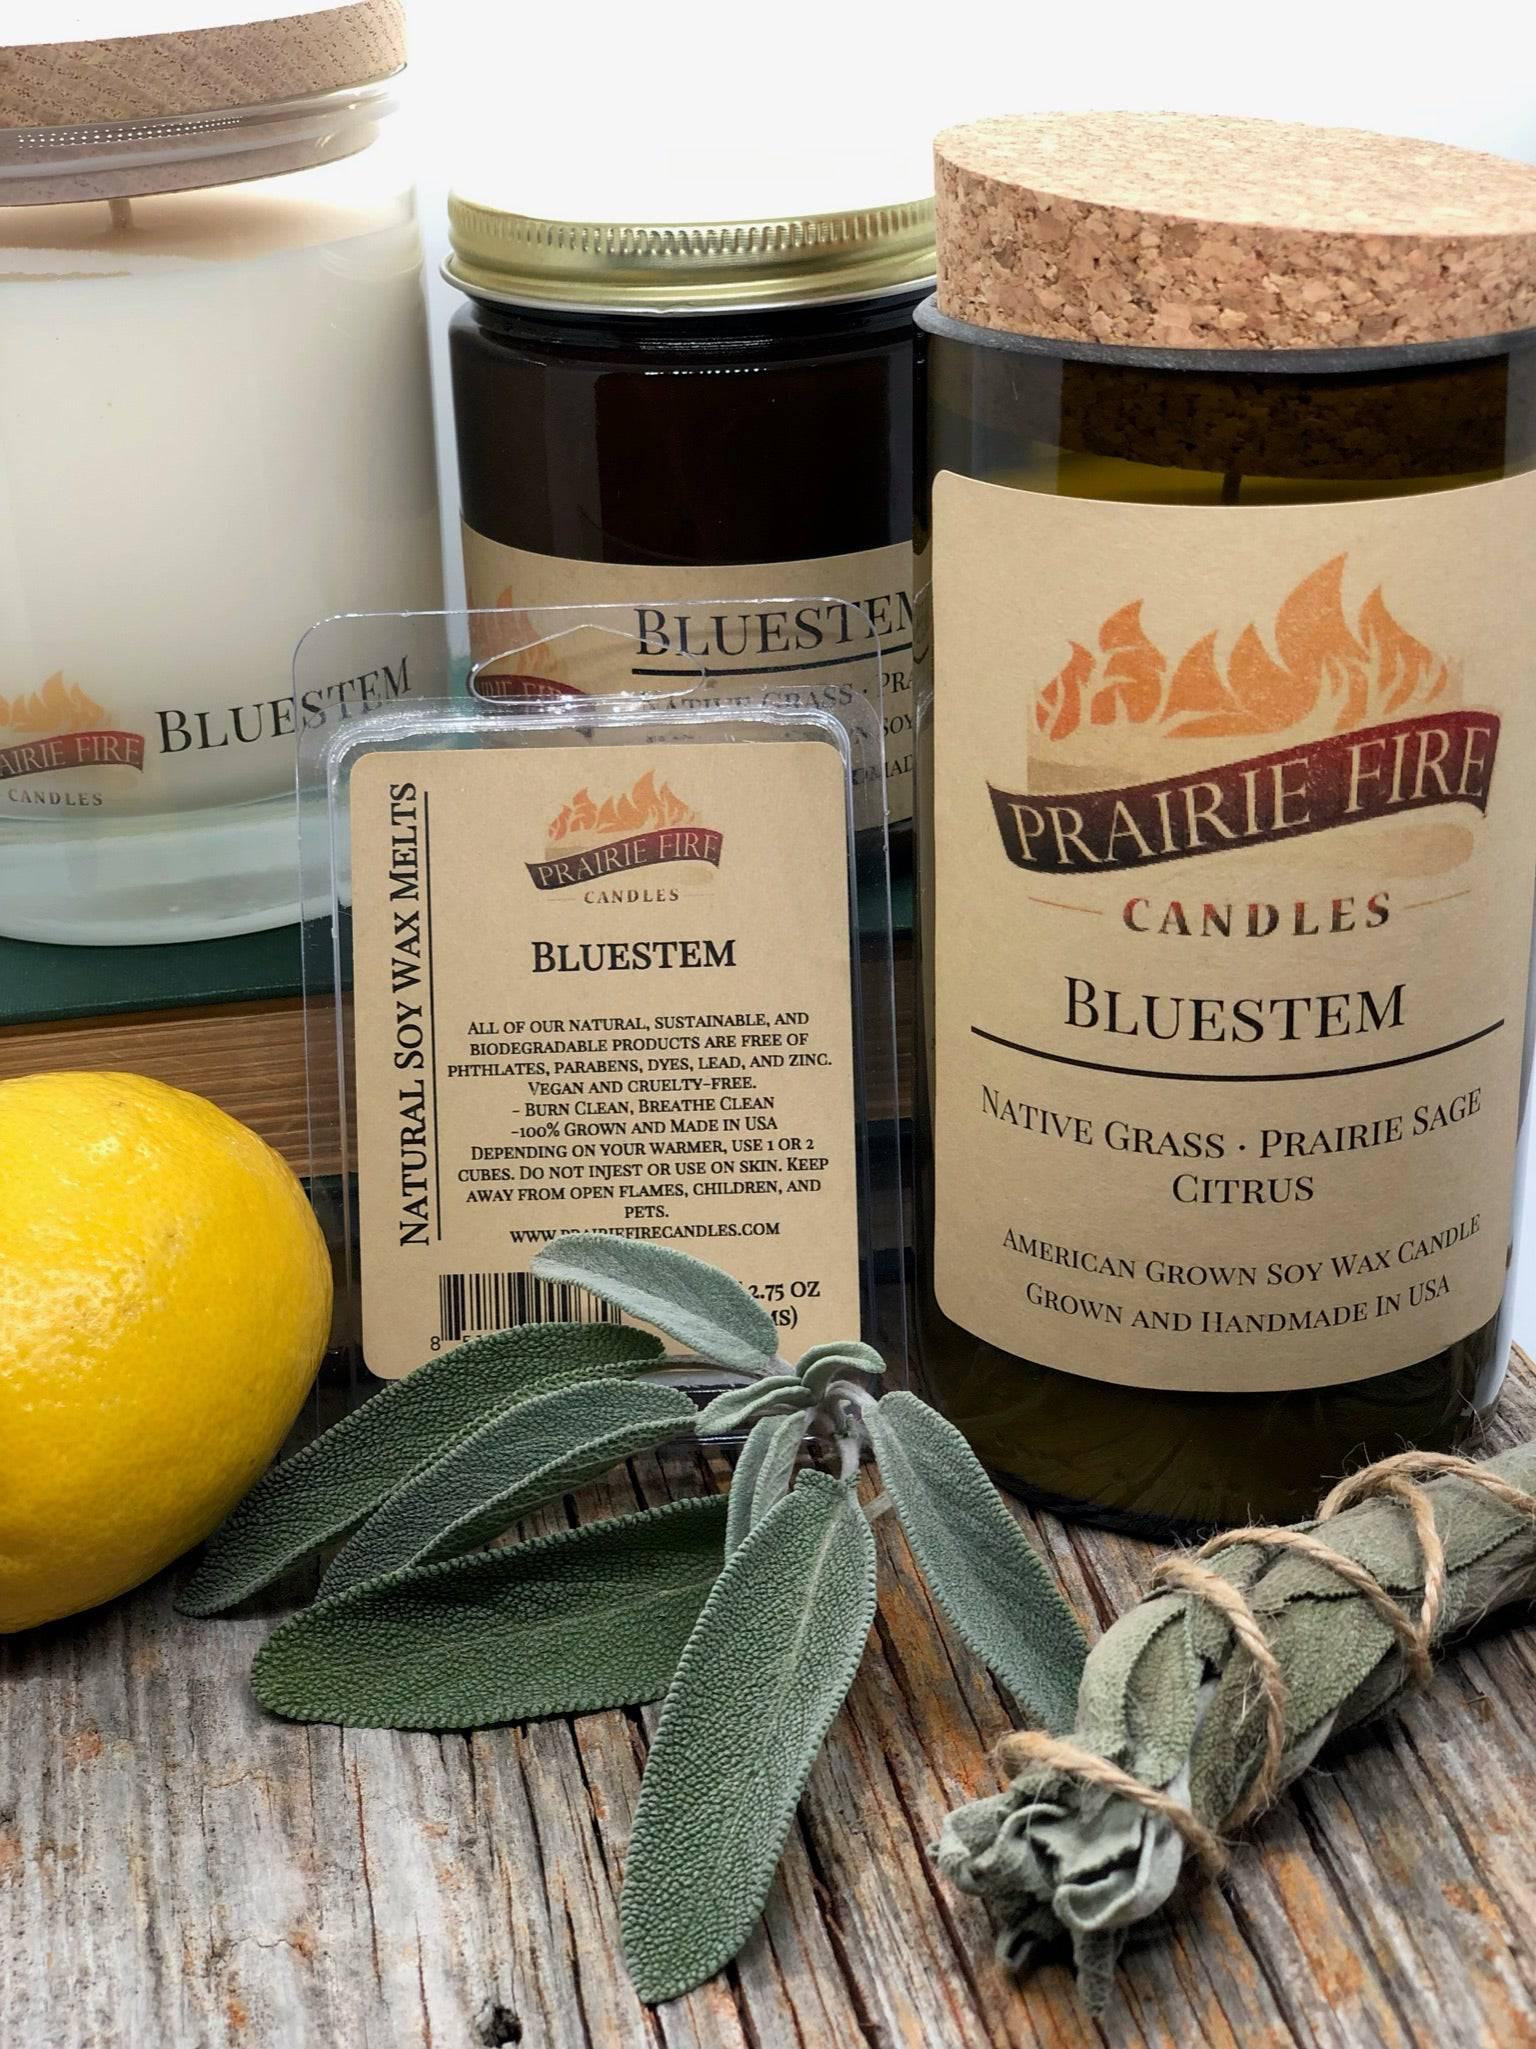 Bluestem Soy Wax Candle | Repurposed Wine Bottle Candle Natural Cork | Handmade in USA Candle | Eco-Friendly Candle | Non-Toxic Soy Candle - Prairie Fire Candles